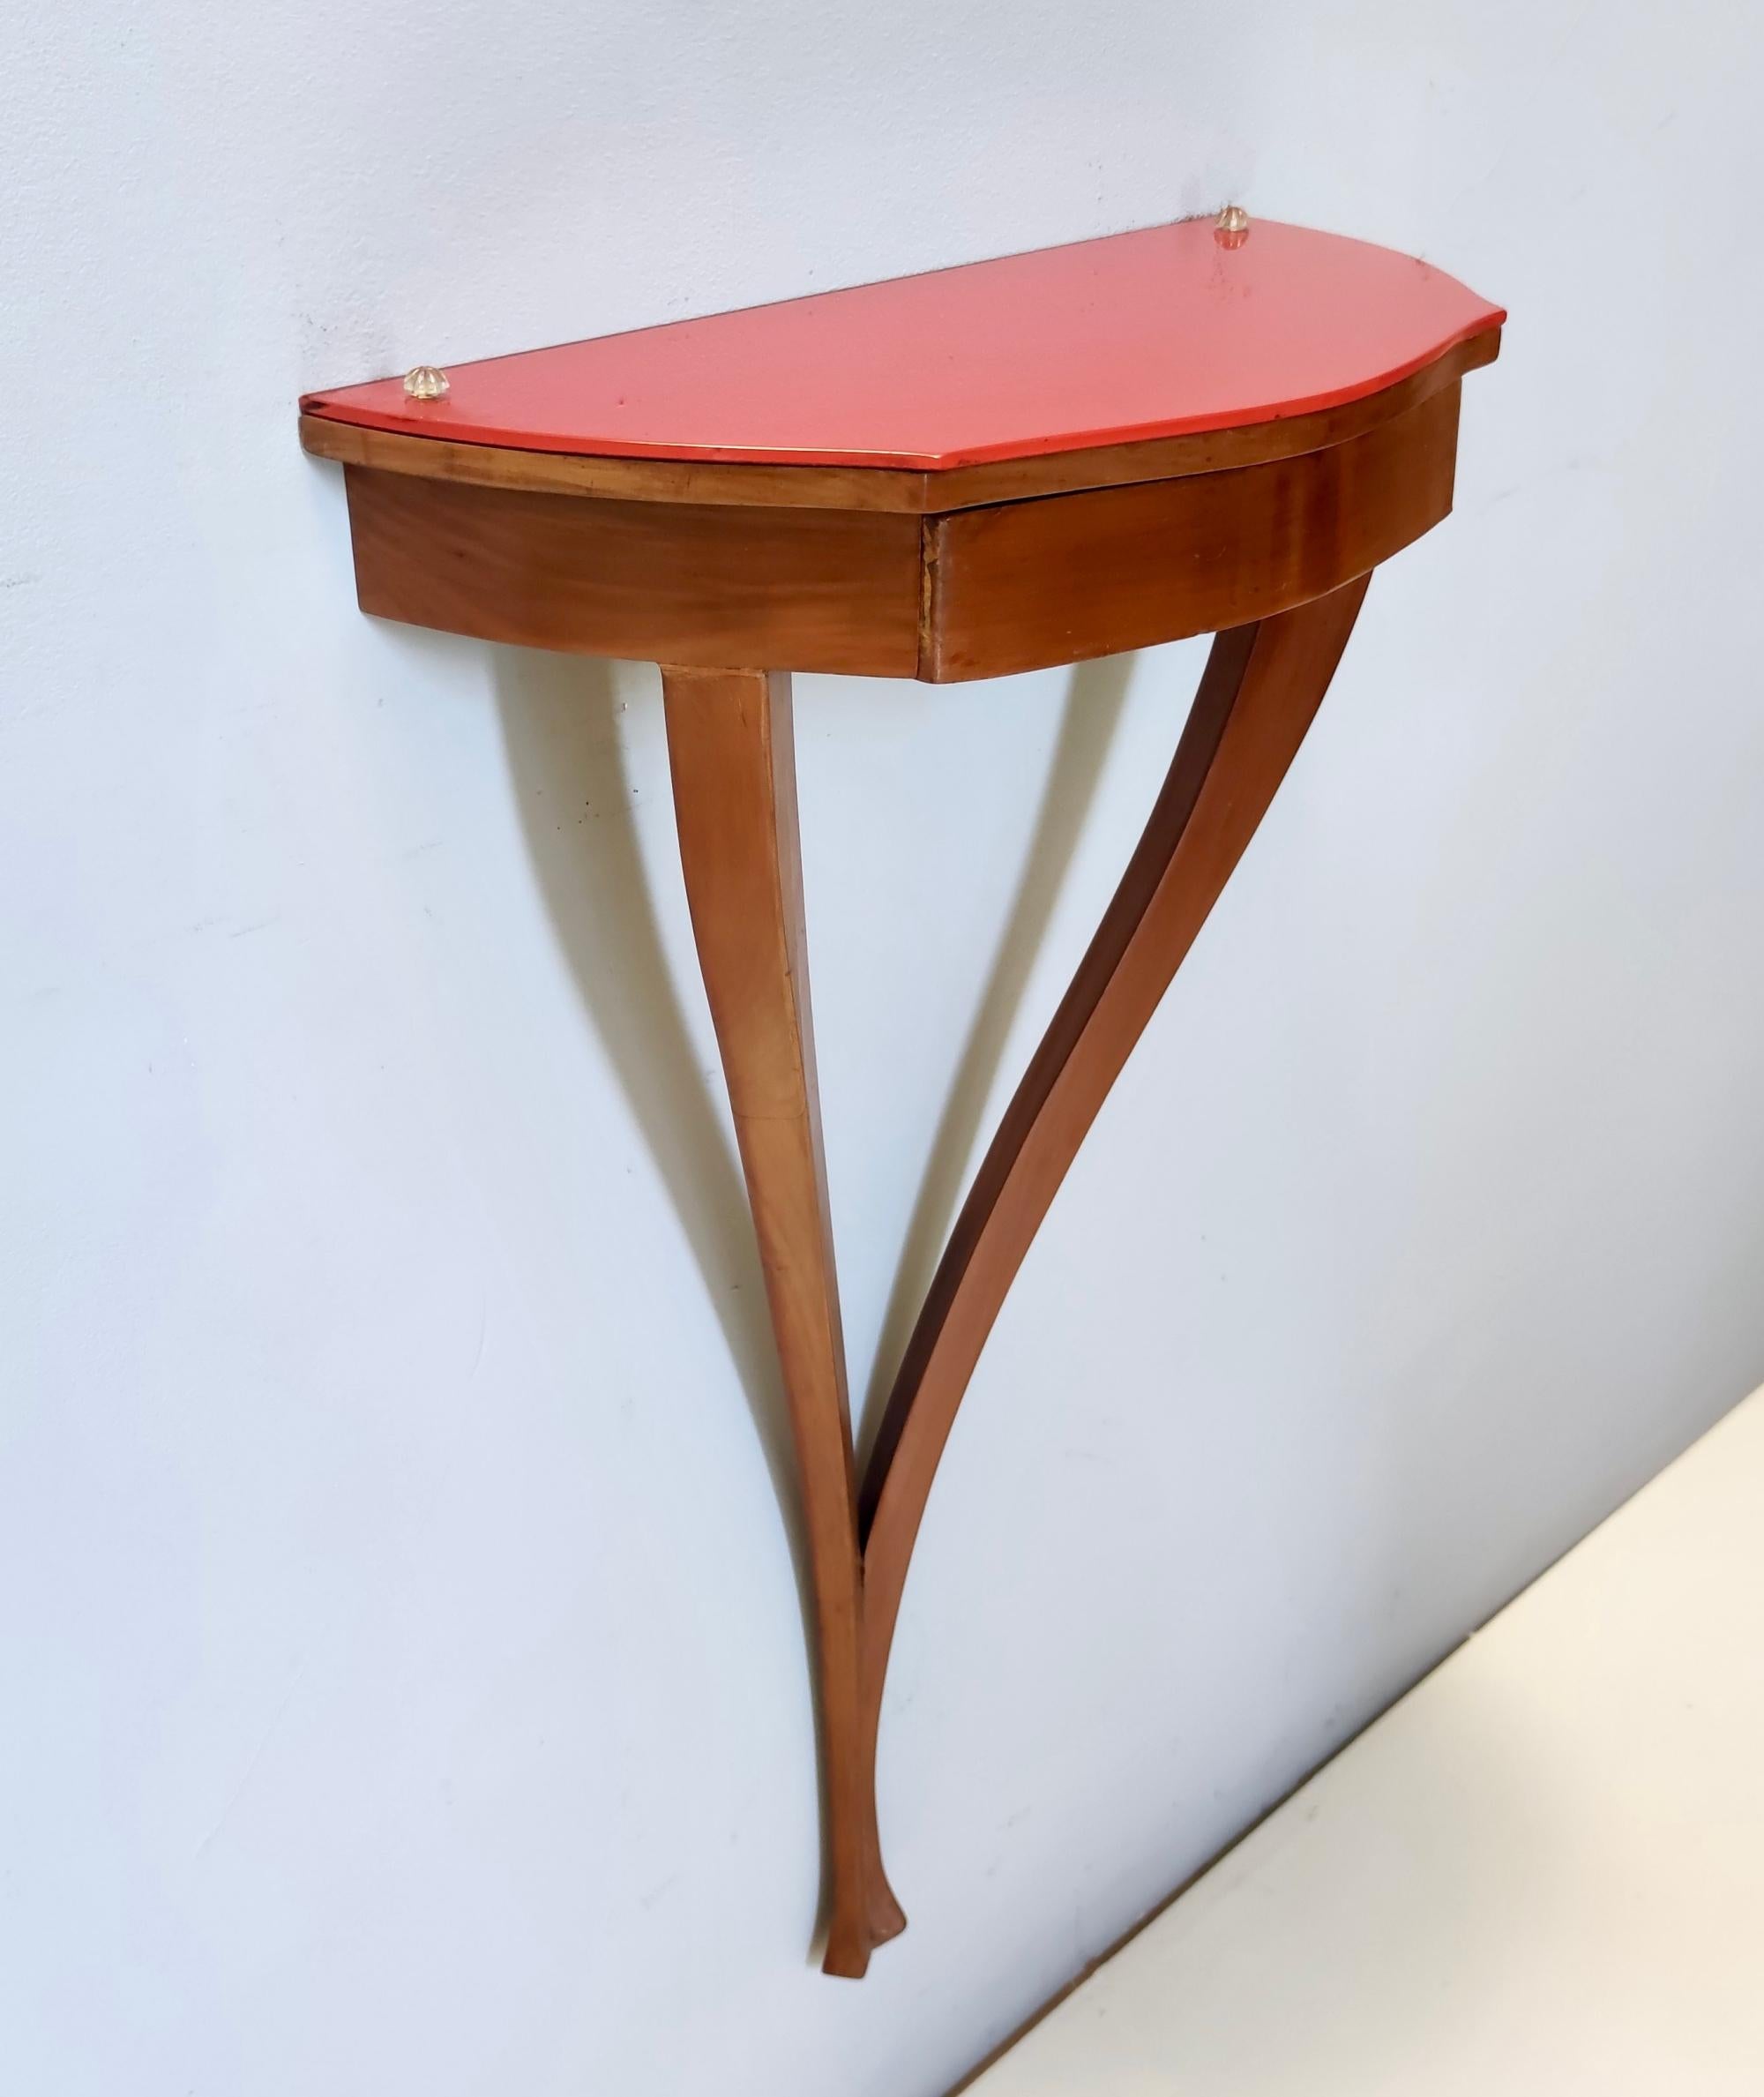 Mid-20th Century Vintage Cherrywood Wall-Mounted Console Ascribable to Guglielmo Ulrich, Italy